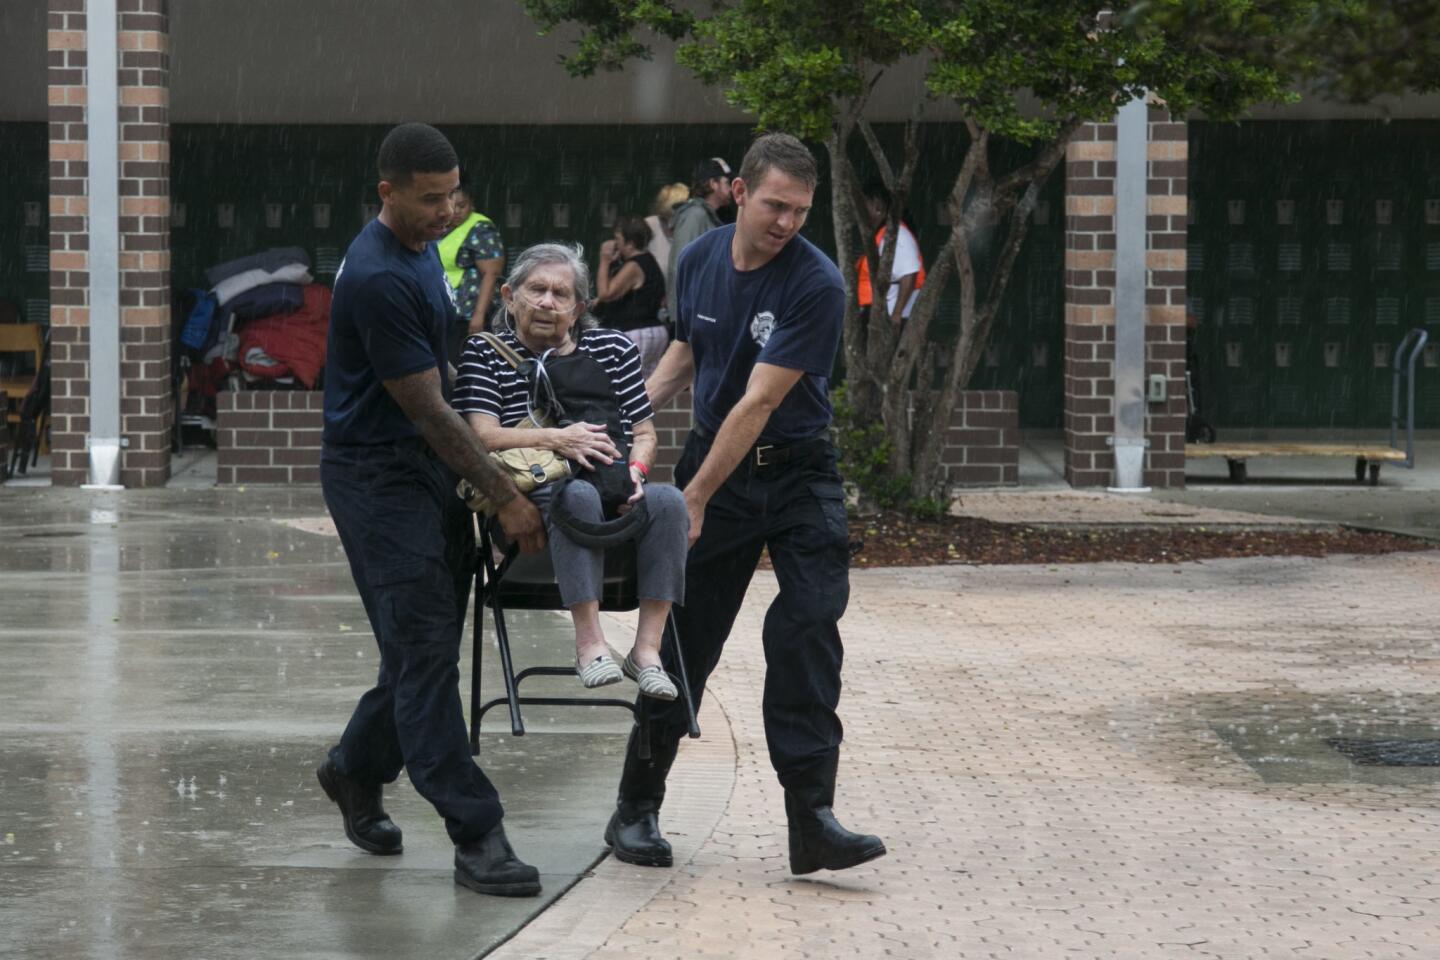 Firefighters Dohnovan Simpson, from left, and Jacob McGovern carry Dolores Gevaza, 83, across the courtyard in the rain at John Hopkins Middle School on Sept. 10, 2017, in St. Petersburg, Fla. The school filled classrooms and hallways with people evacuating.